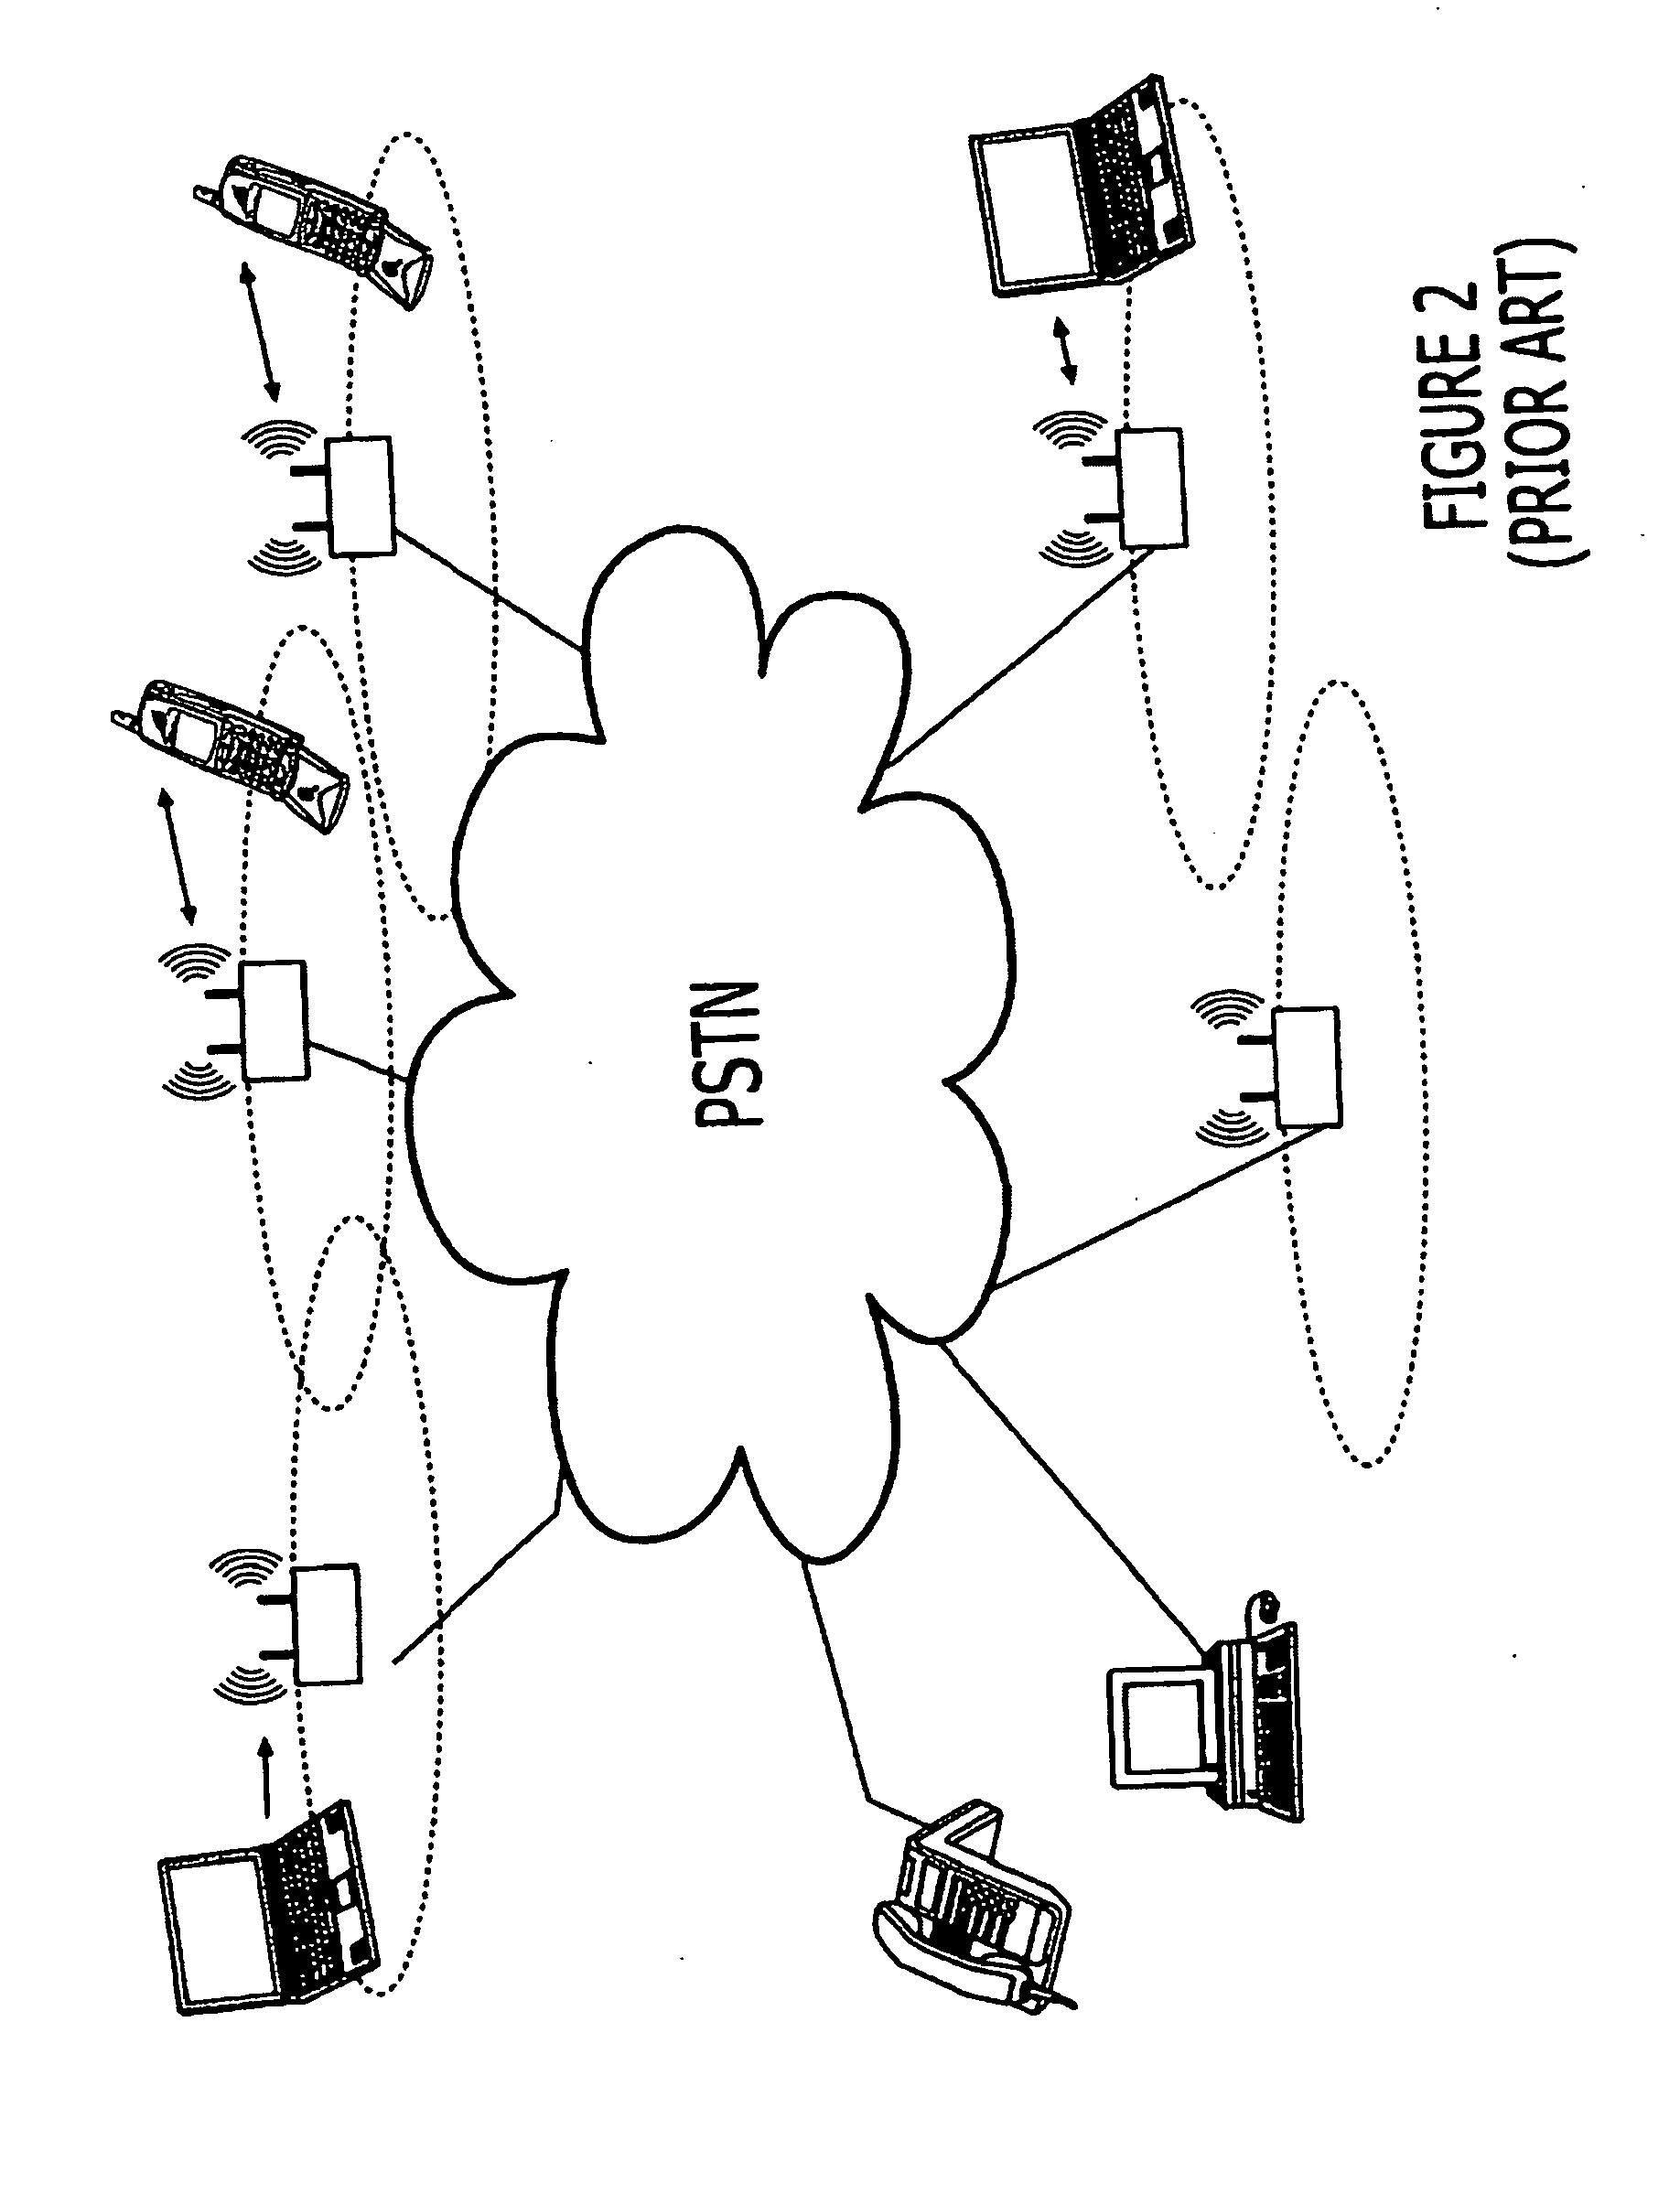 Methods and electronic devices for wireless ad-hoc network communications using receiver determined channels and transmitted reference signals